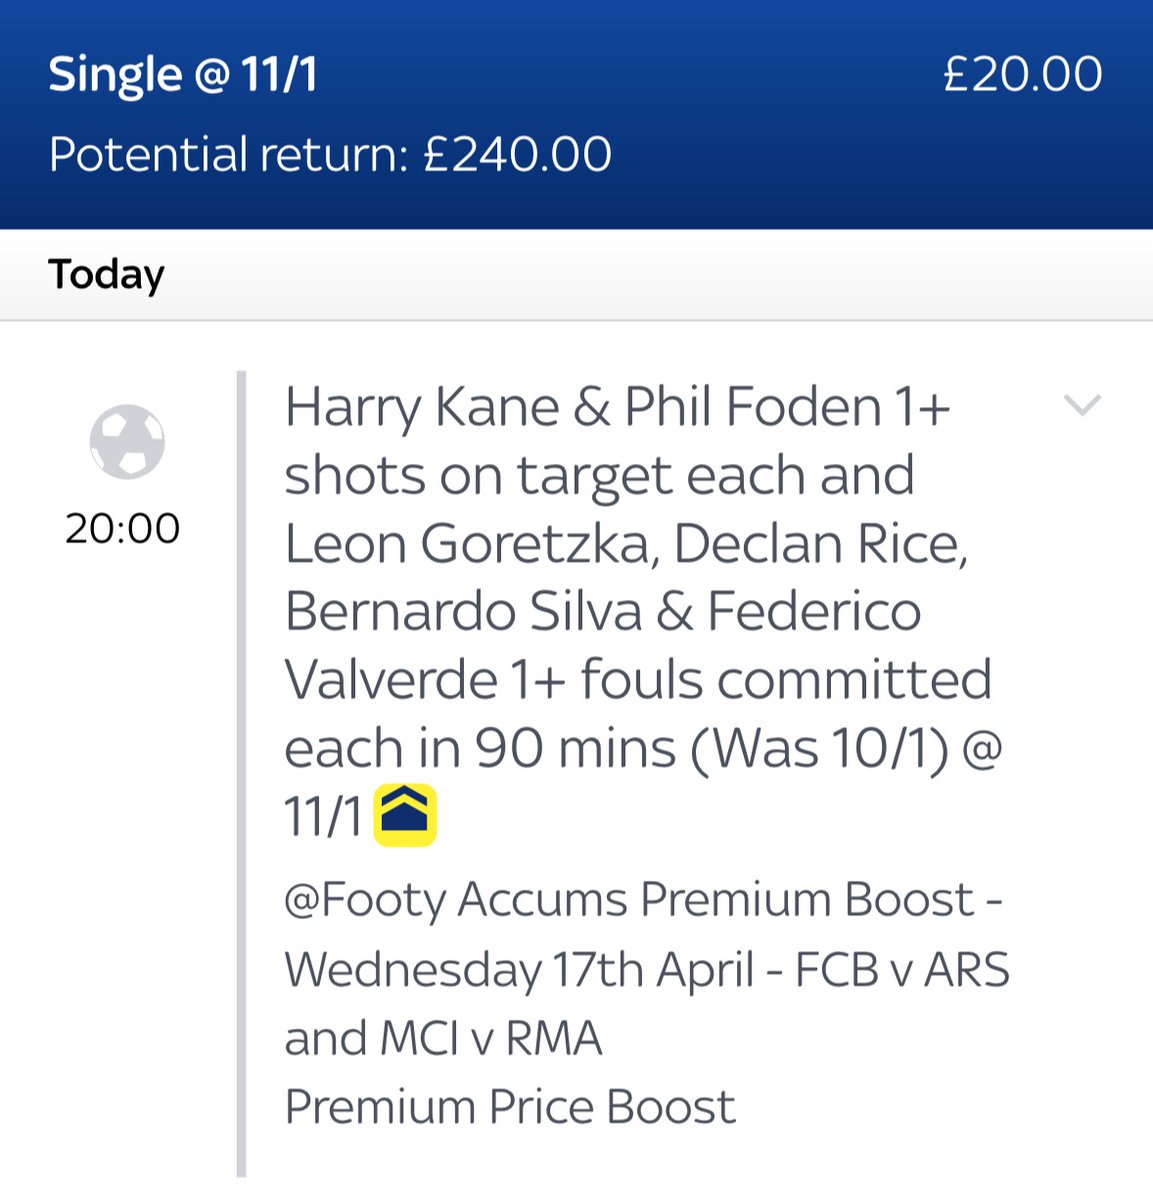 We are giving away the full £240 returns of tonight's 11/1 special to one entry if it lands! 🚨 RT TO ENTER! ✅ EXCLUSIVE LINK to this special will go live as soon as tonight's teams are confirmed around 6:45pm! ⏰ 18+